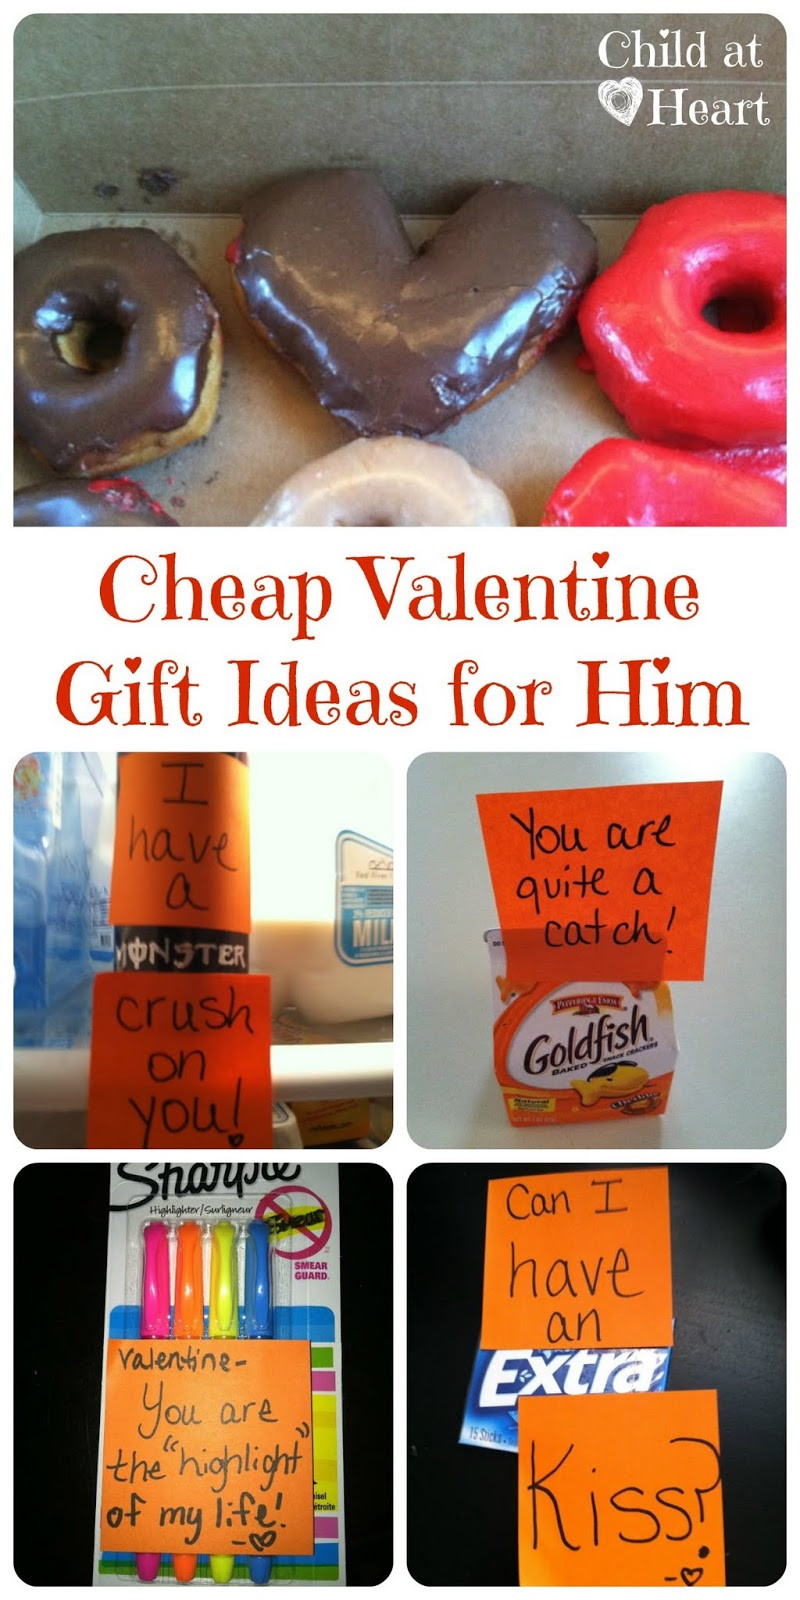 Funny Valentine Gift Ideas
 Cheap Valentine Gift Ideas for Him Child at Heart Blog